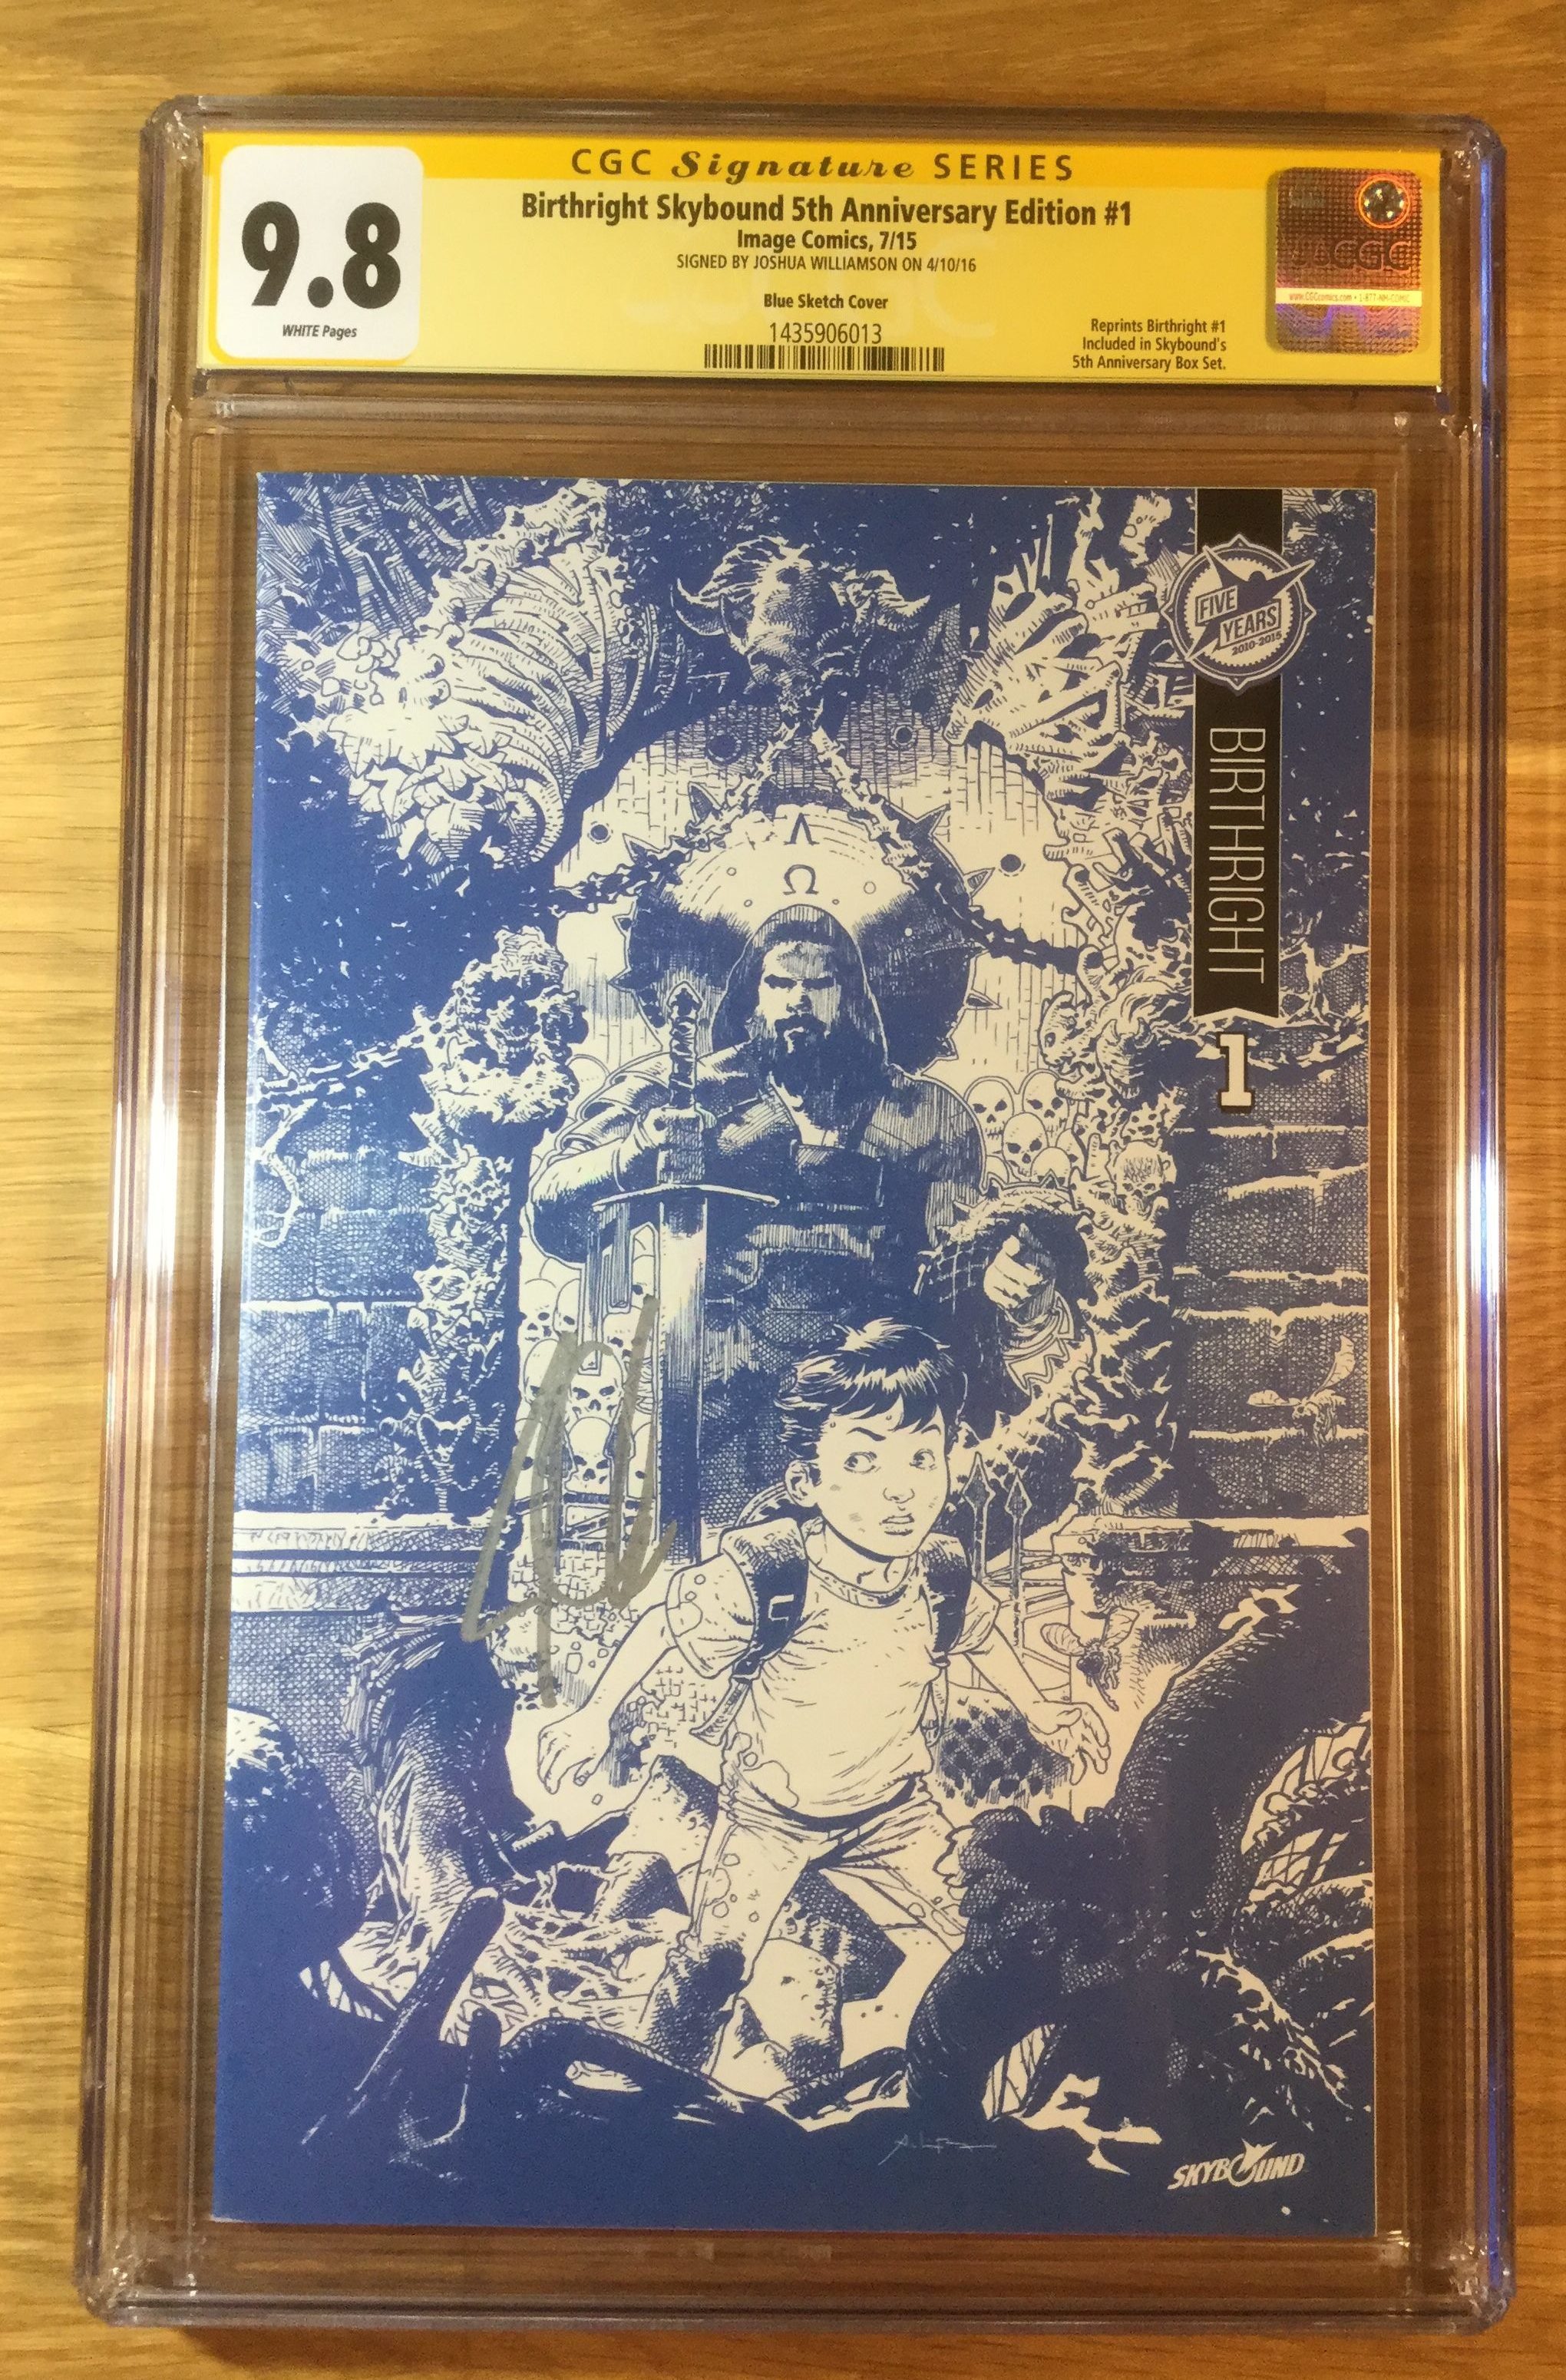 5th Anniversary Variant Cover Blue Line Sketch CGC 9.8 NM/MT Birthright 1